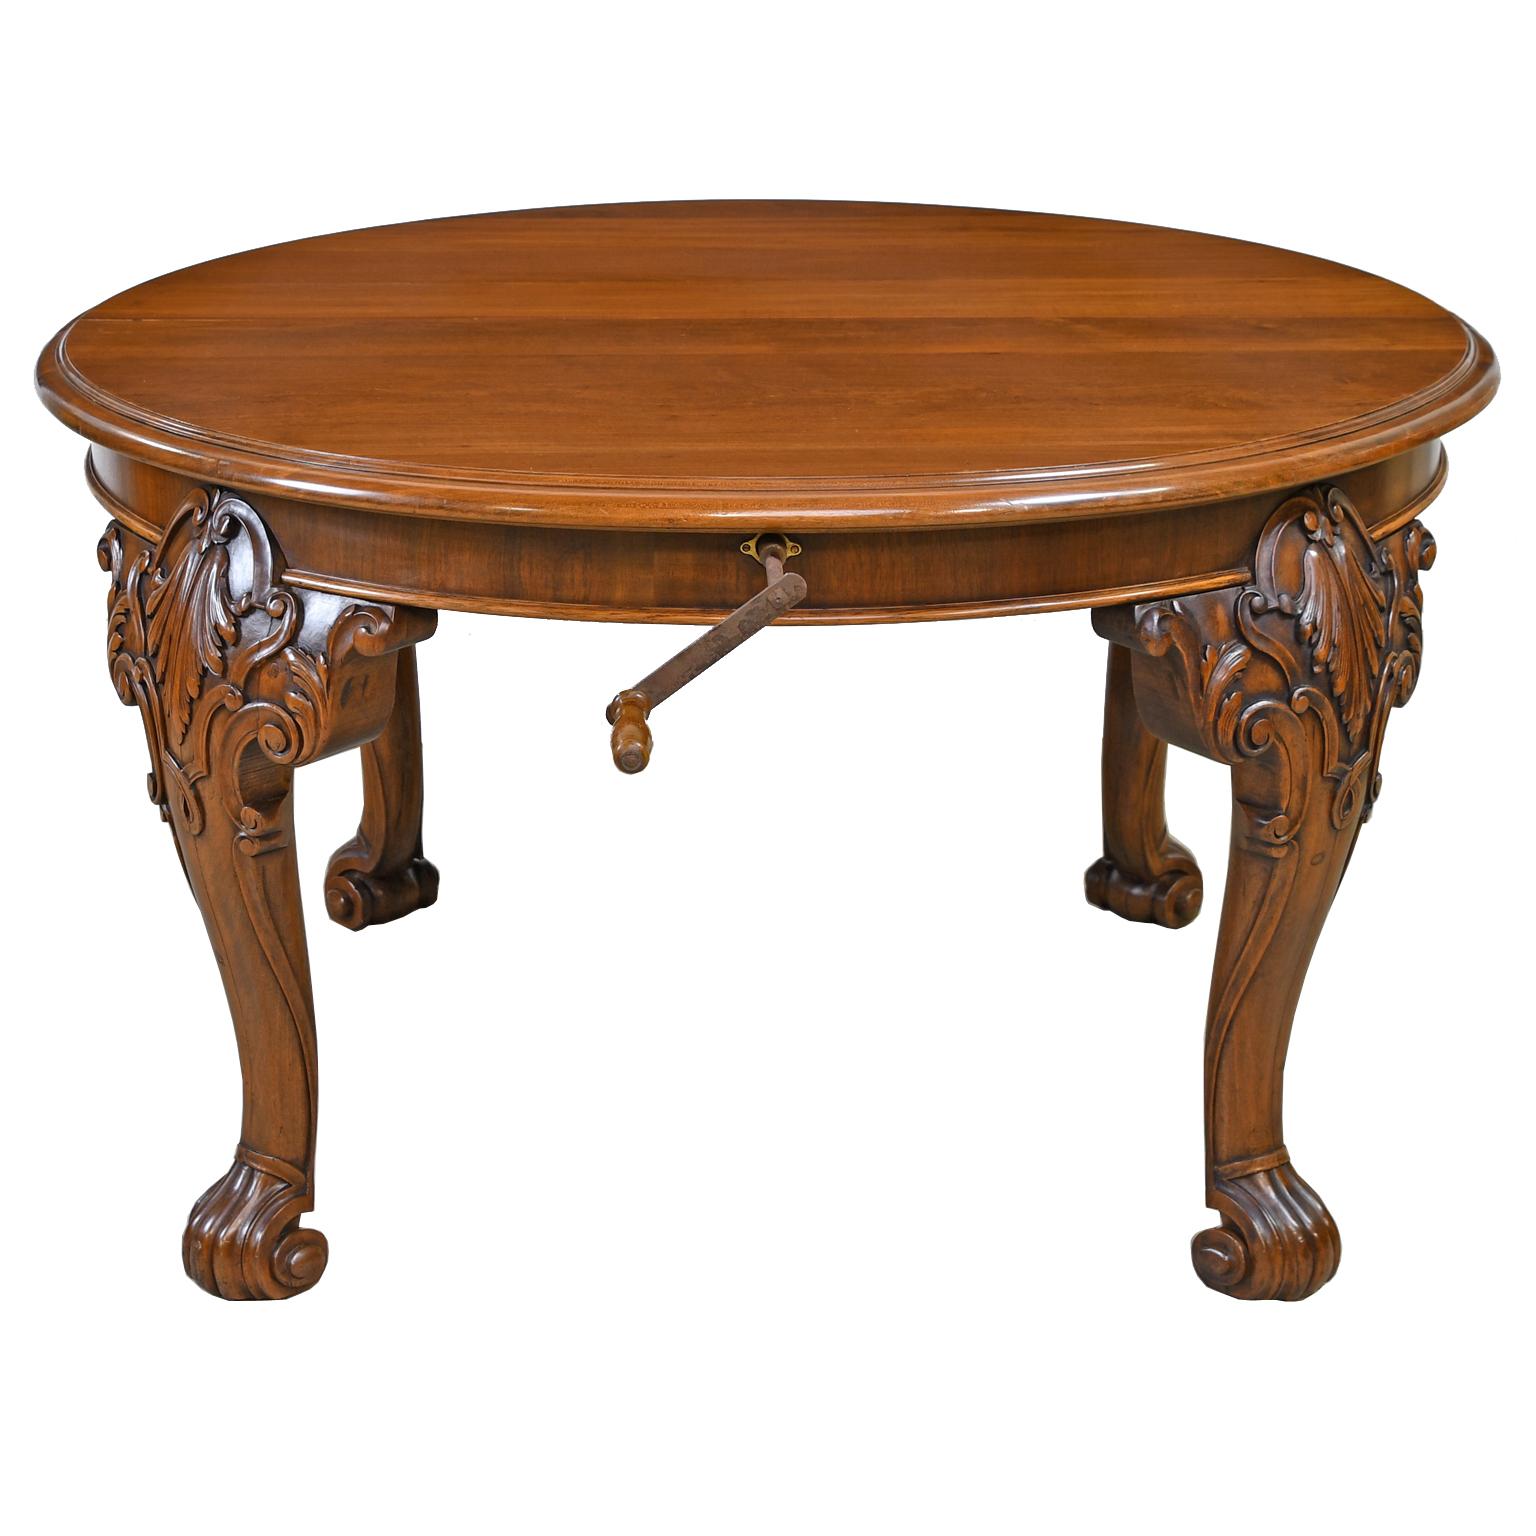 A very beautiful Victorian extension dining table in solid walnut with racetrack form on cabriole legs with carved cartouches and acanthus foliage on knees, and resting on scroll feet. Features a 54